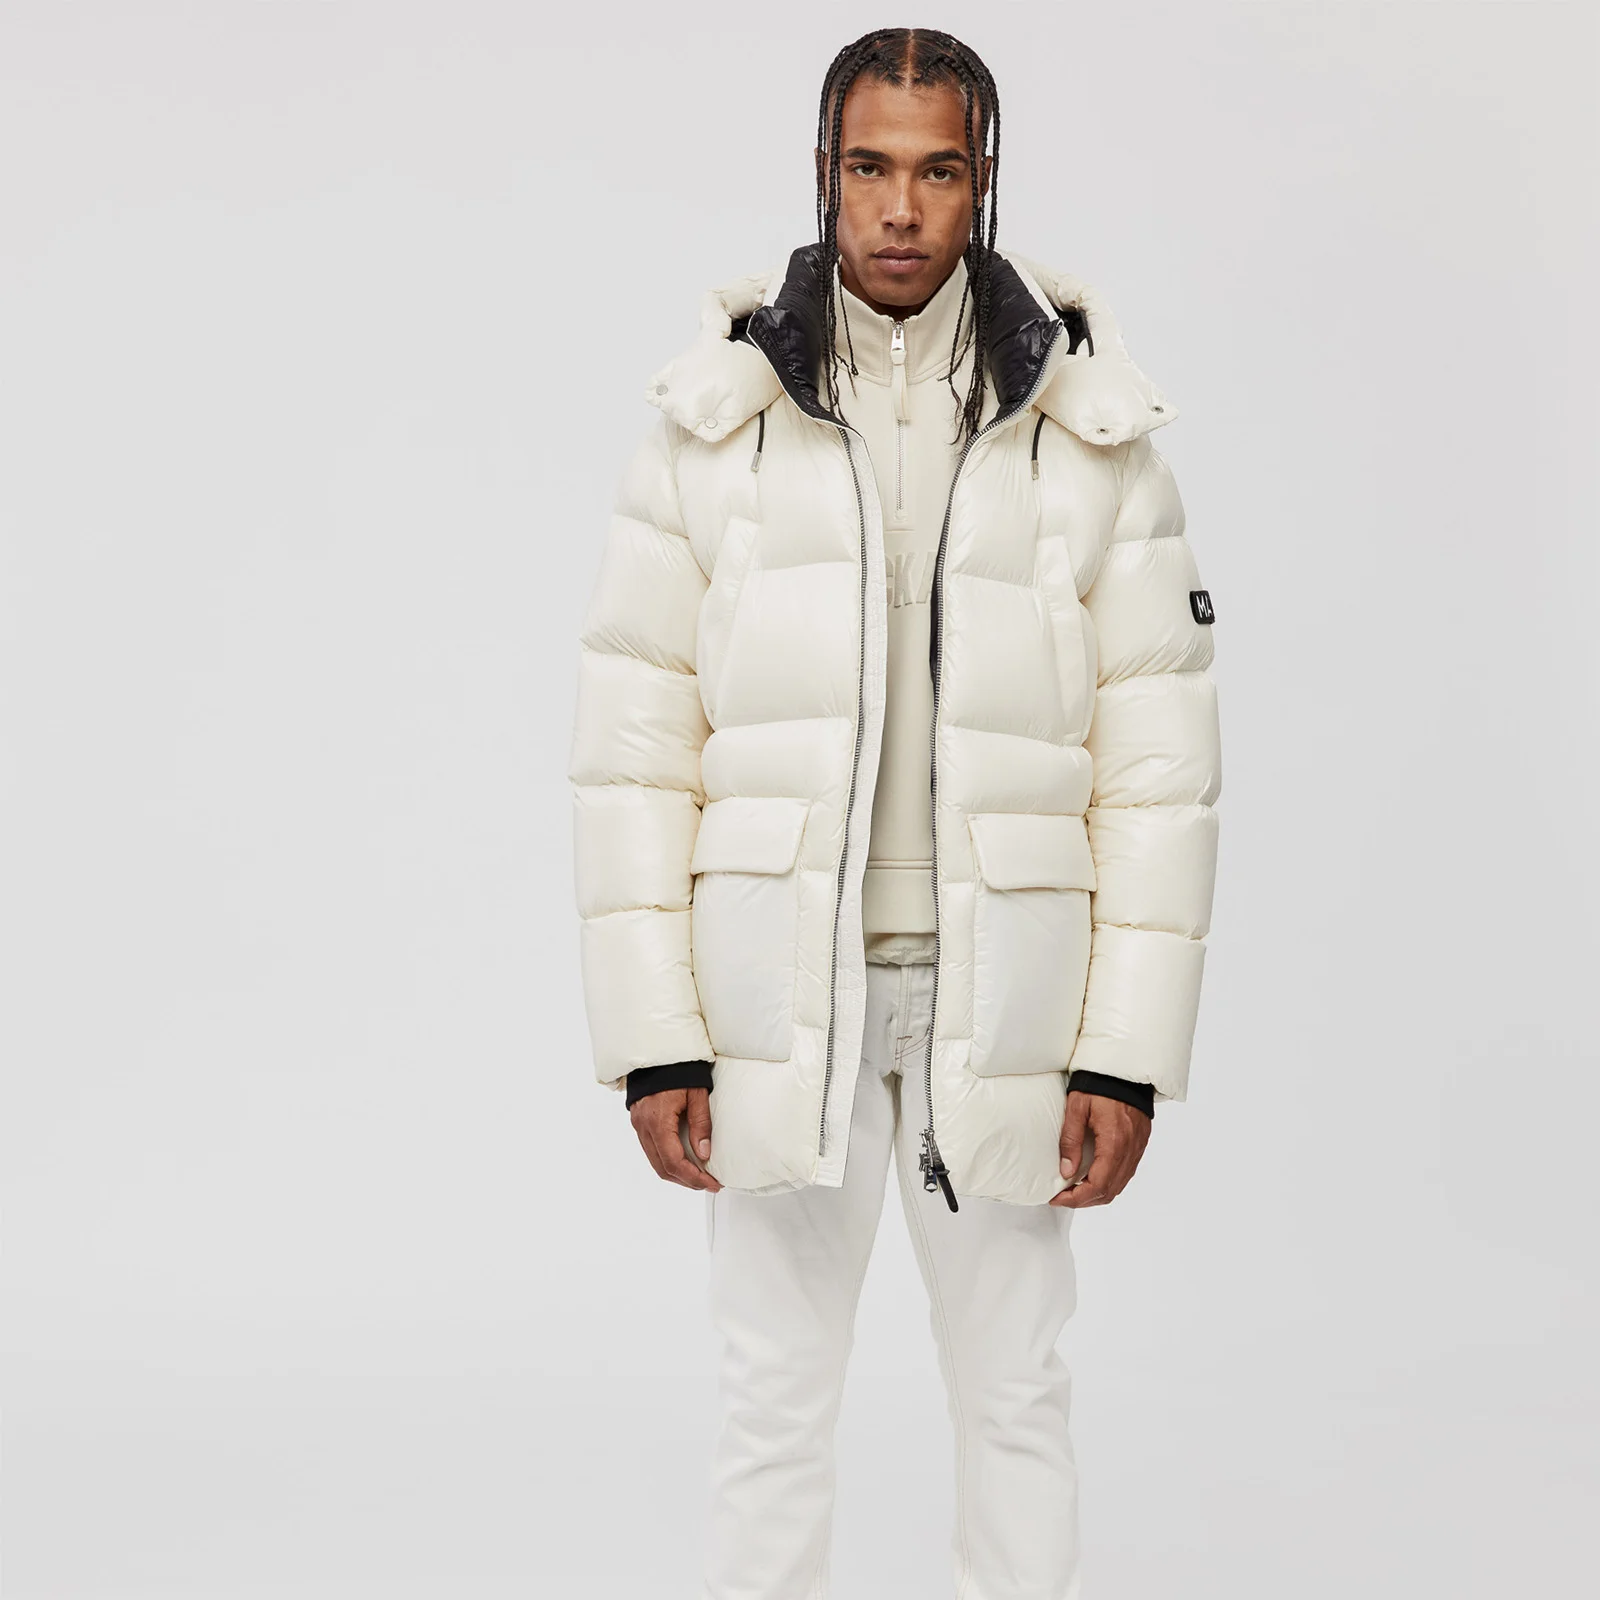 Mackage Men's Kendrick Down Puffer with Removable Hood - Cream Image 1